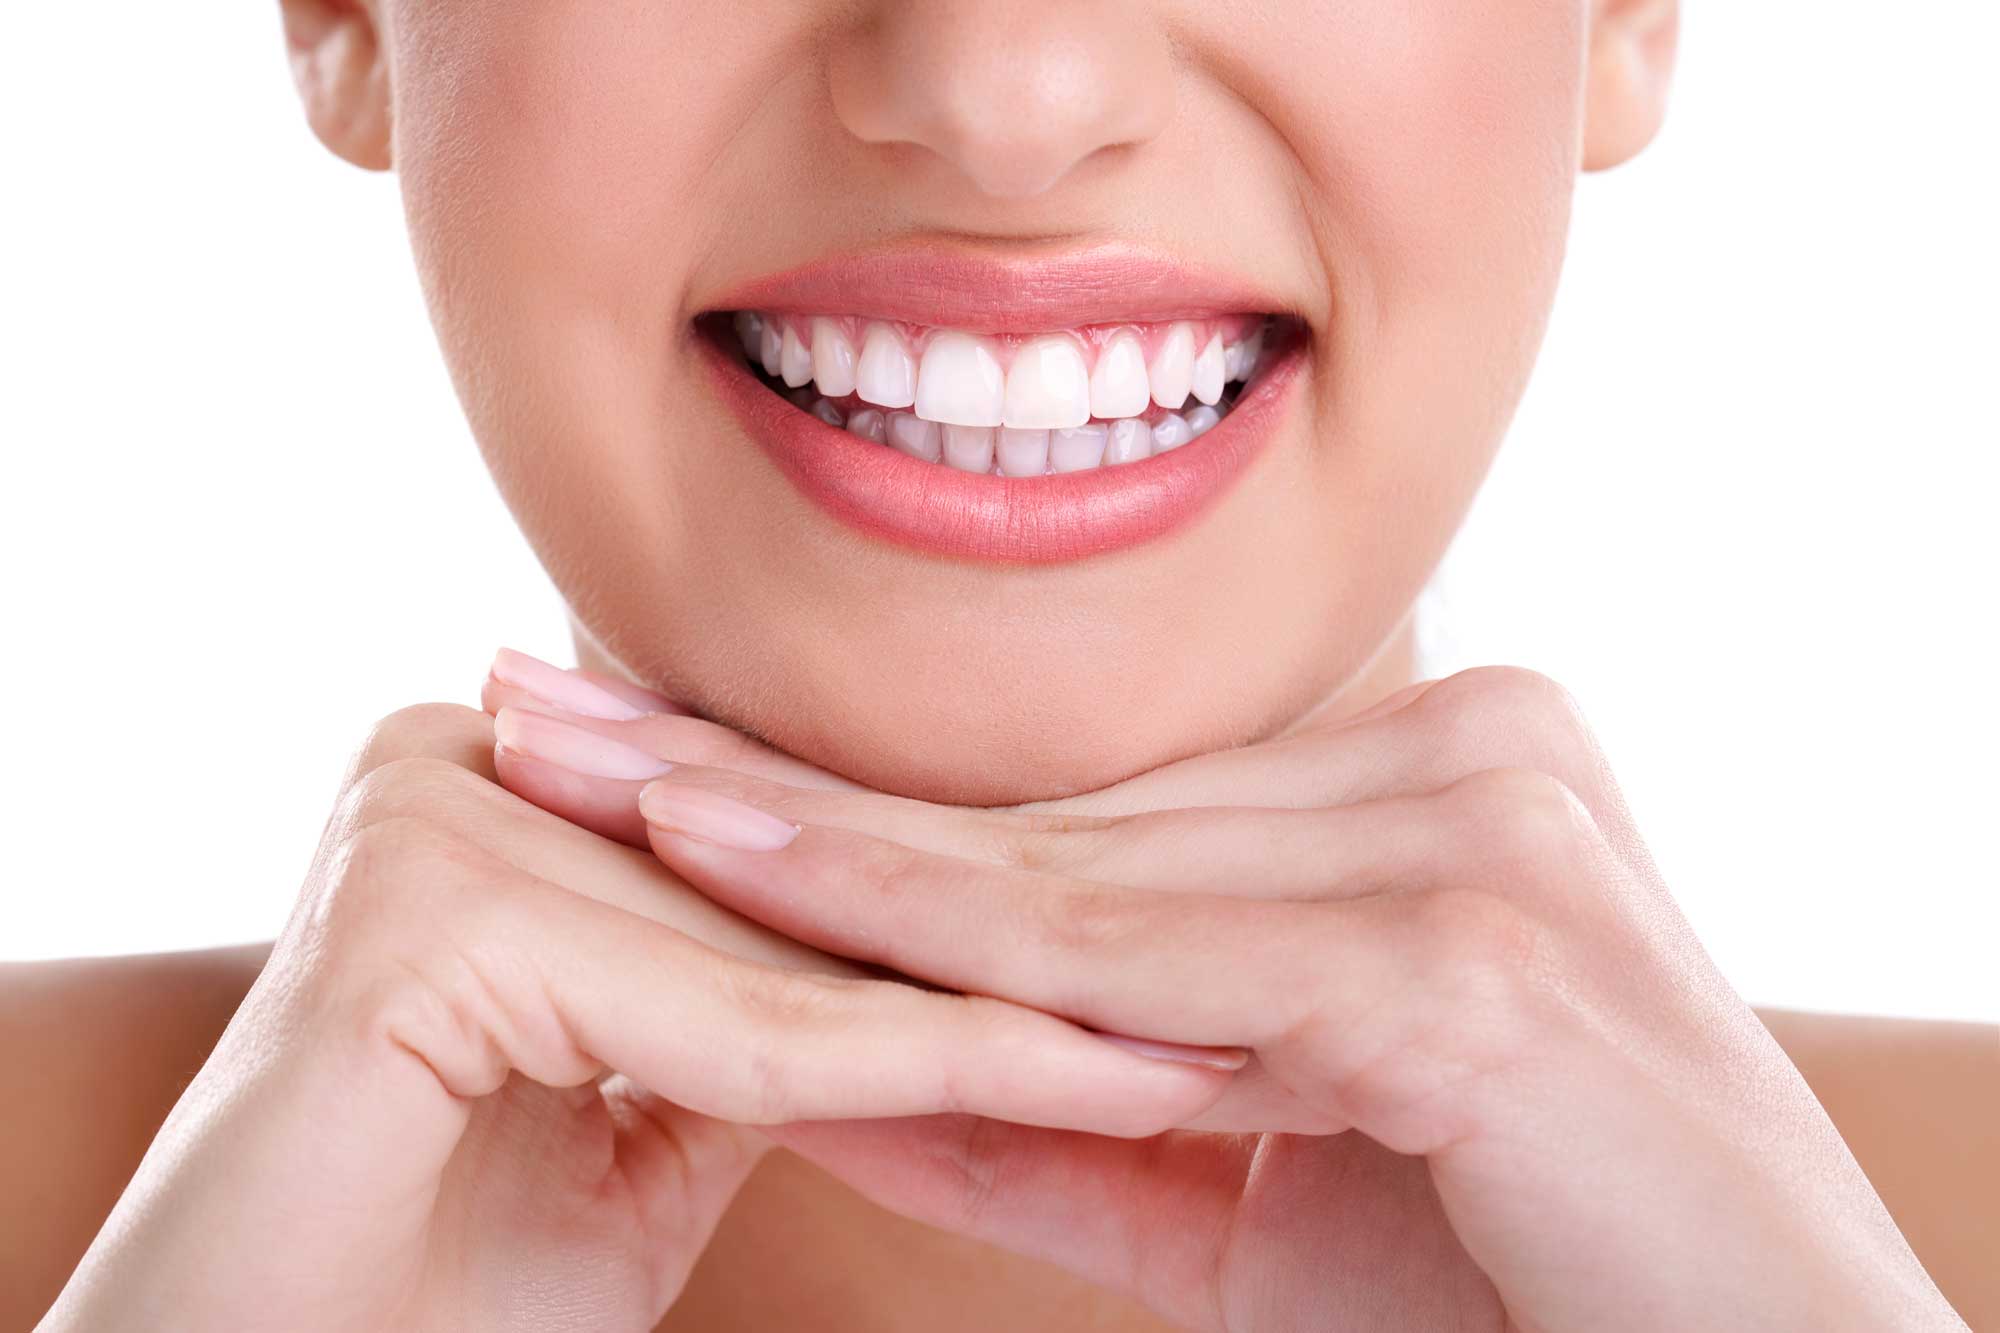 Cosmetic Dentistry Treatments, Smile Makeovers in Lara